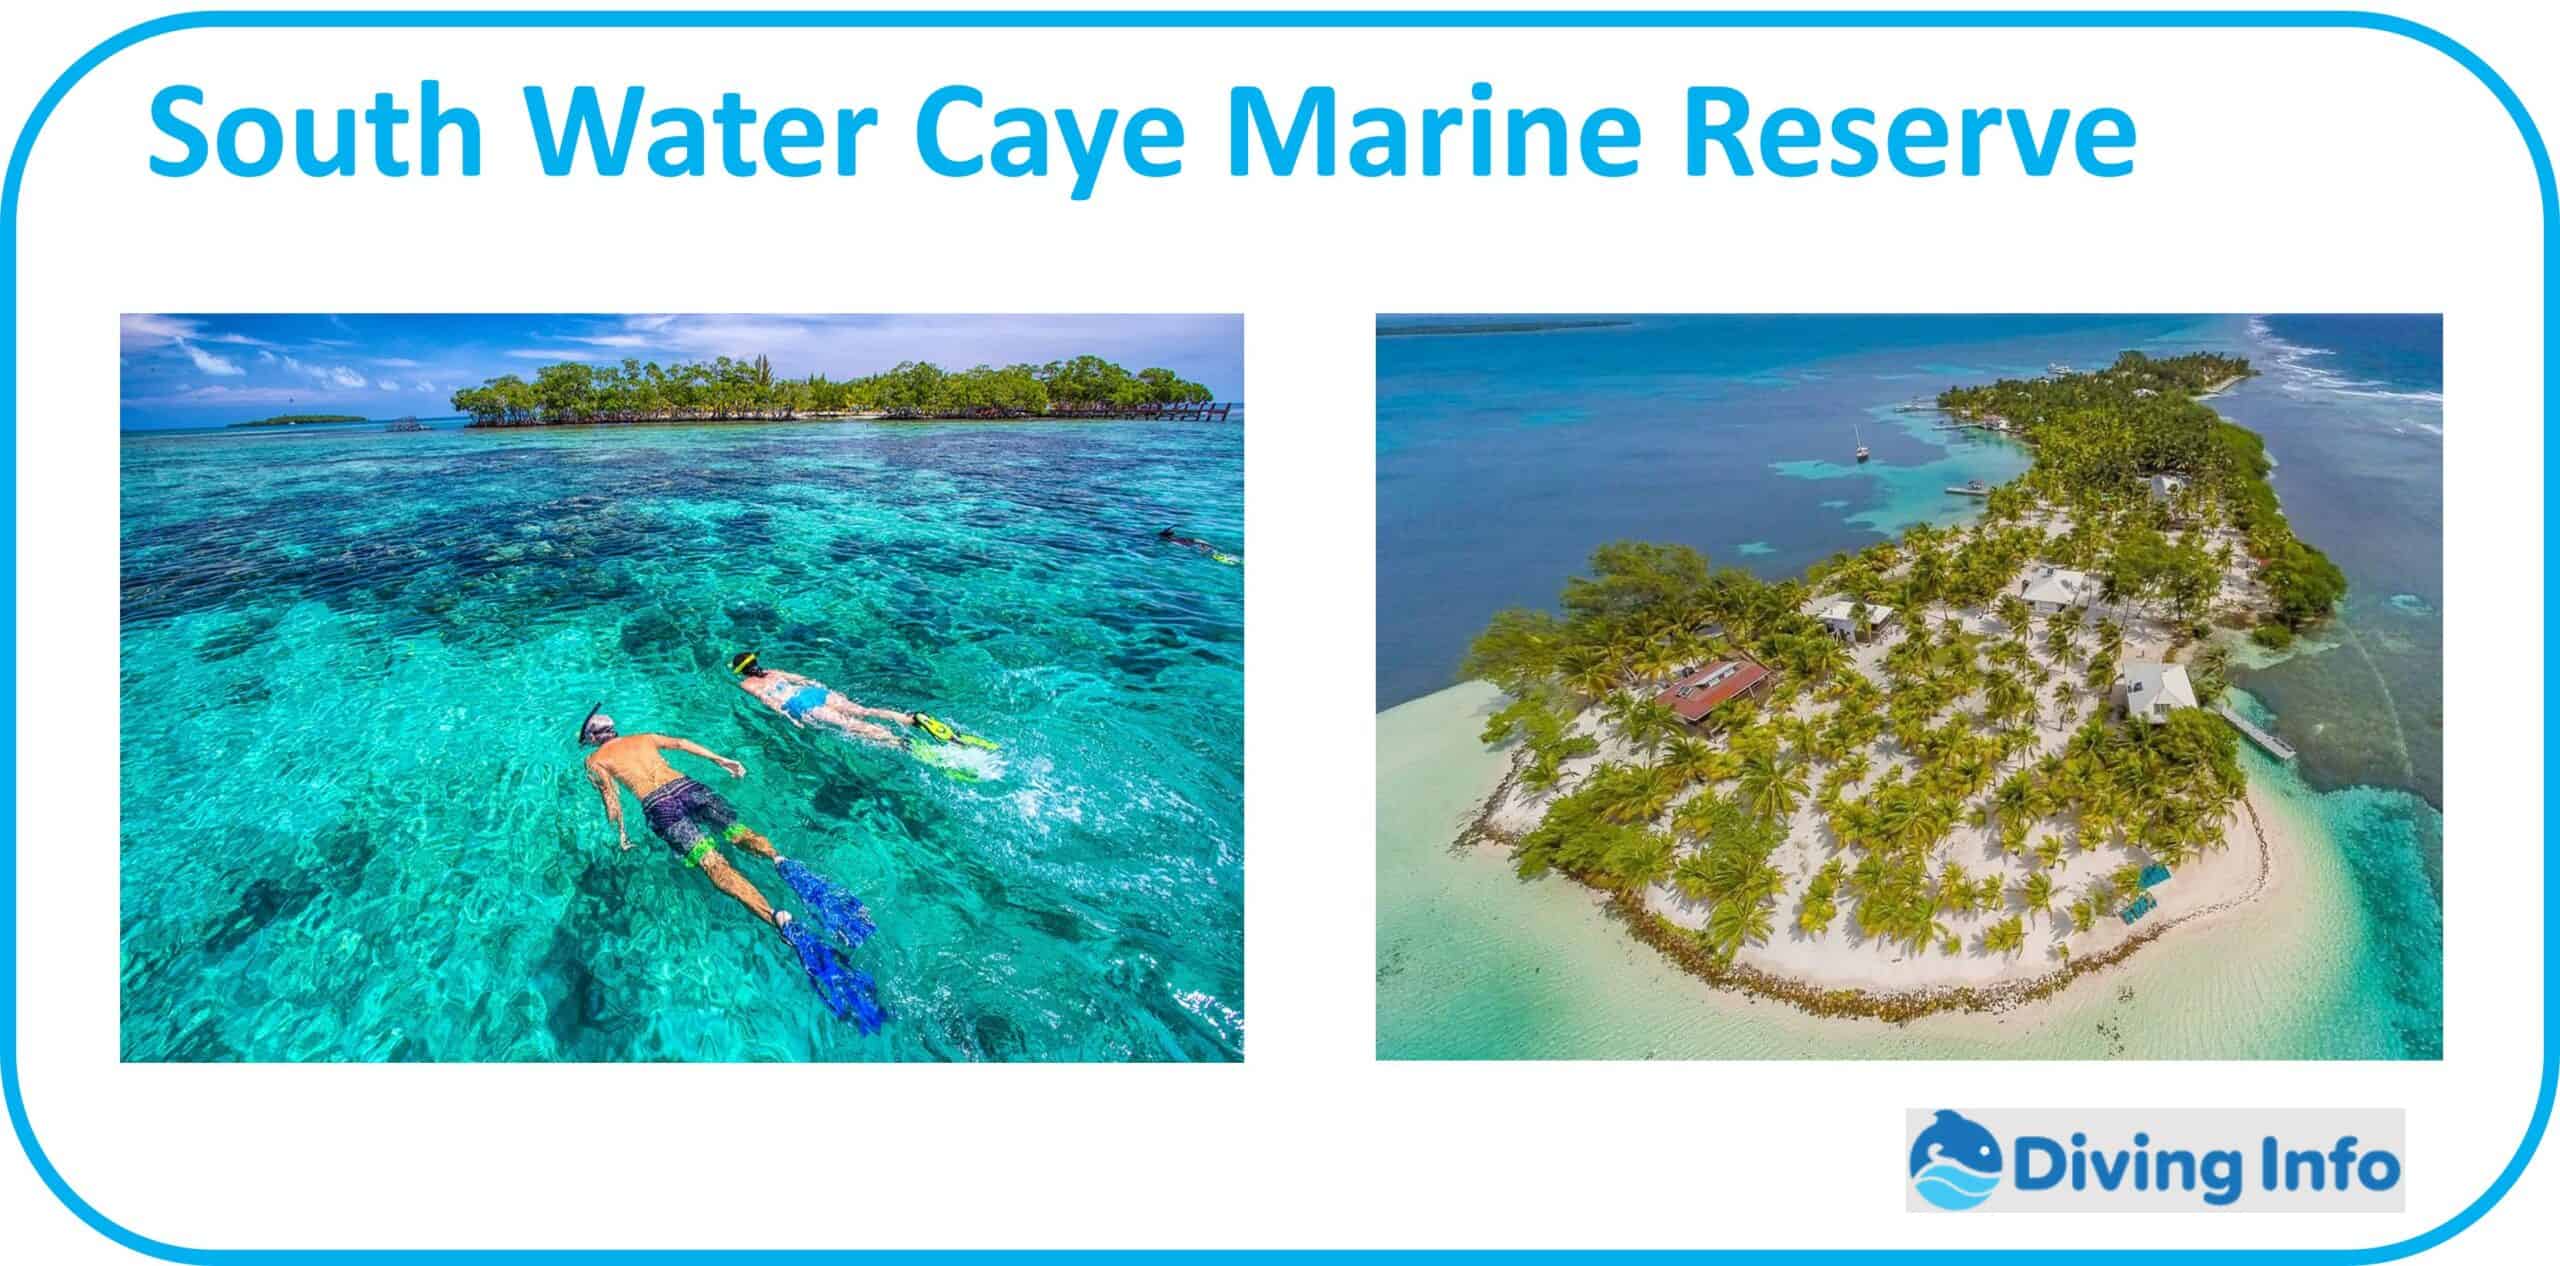 South Water Caye Marine Reserve